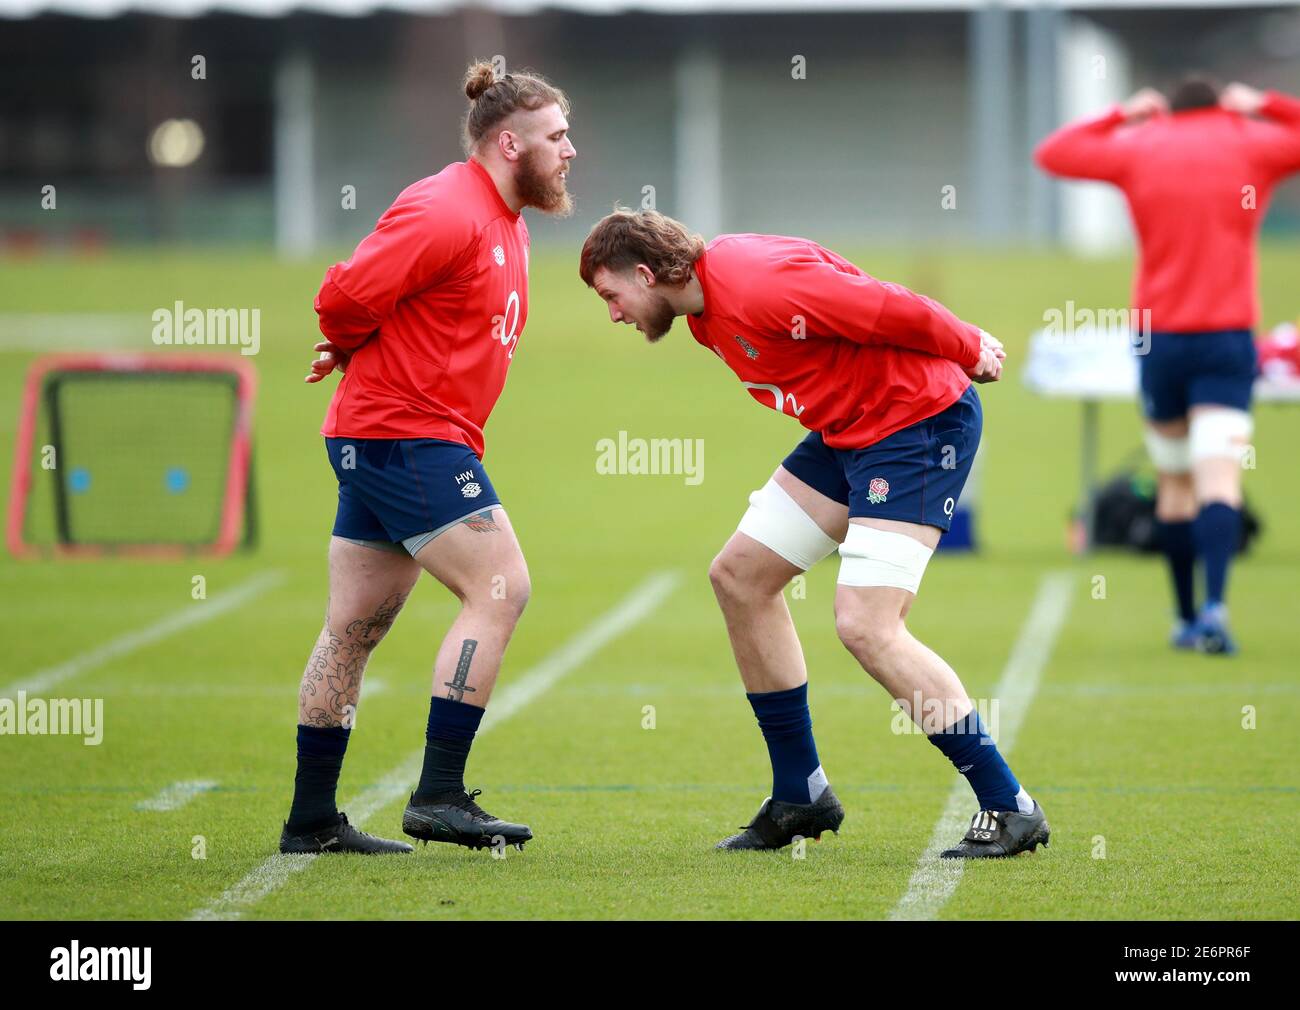 England's Harry Williams (left) and Jonny Hill during a training session at St. George's Park, Burton upon Trent. Picture date: Friday January 29, 2021. See PA story RUGBYU England. Photo credit should read: Dave Rogers/PA Wire. RESTRICTIONS: Use subject to restrictions. Editorial use only, no commercial use without prior consent from rights holder. Stock Photo